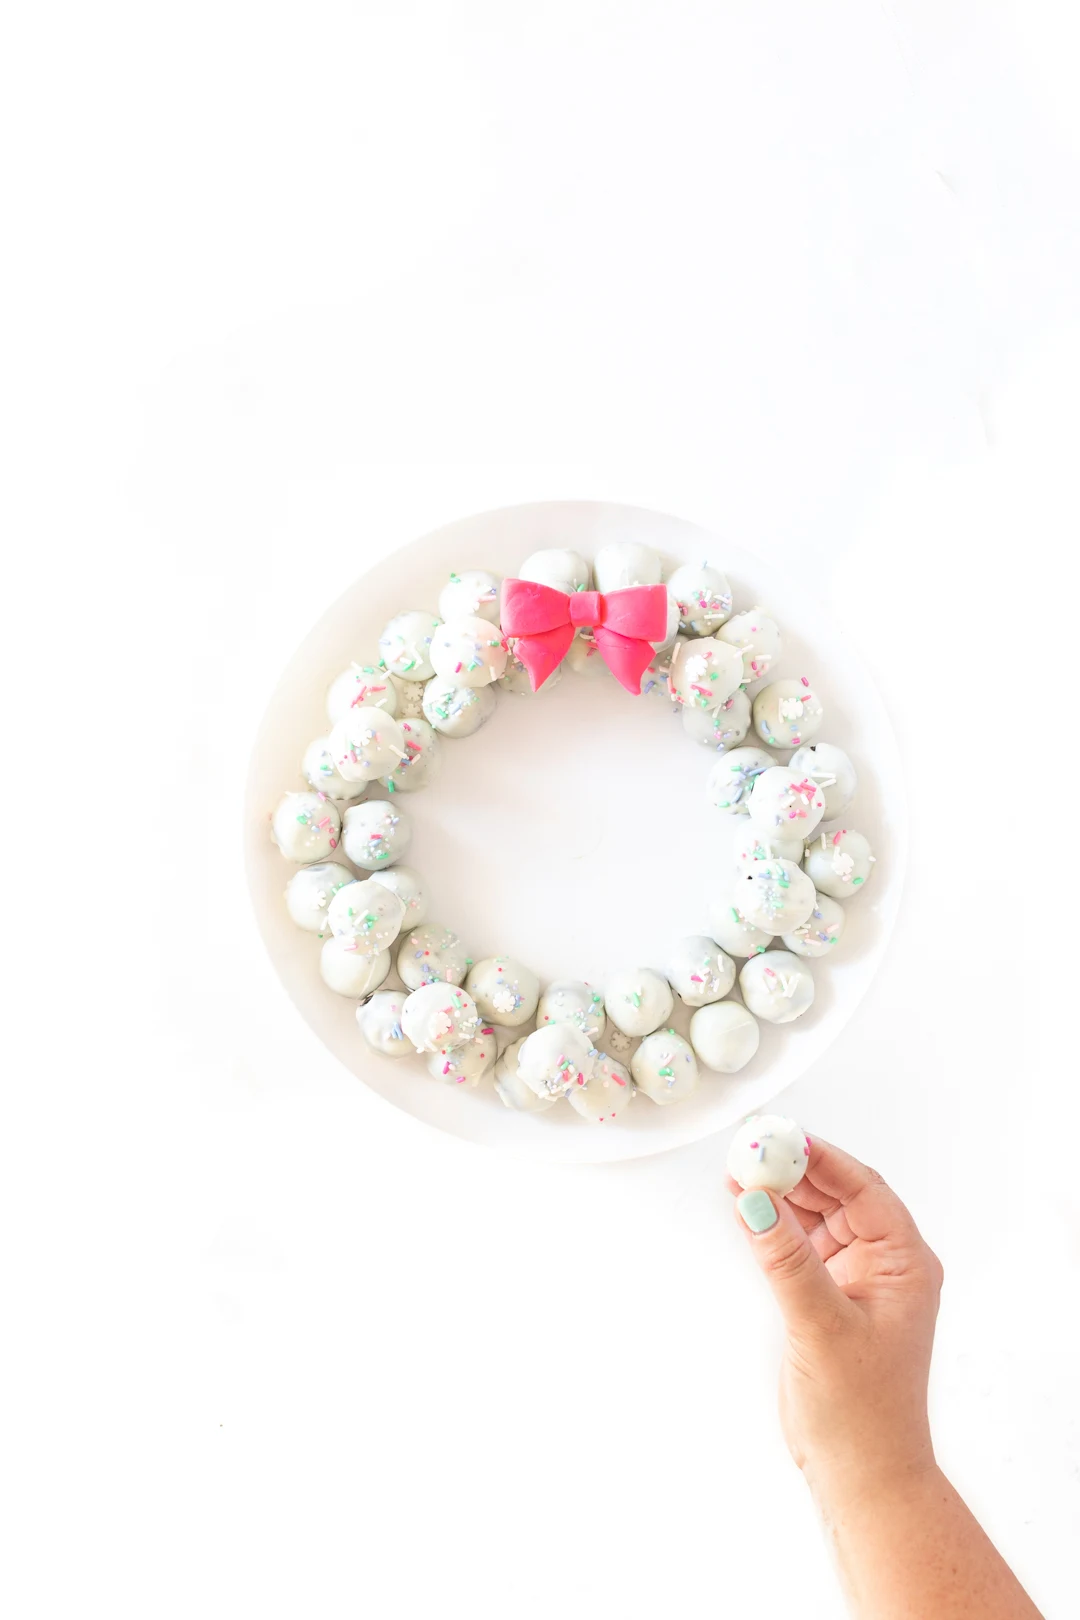 pretty OREO cookie wreath made with white OREO cookie balls and a fondant pink bow.